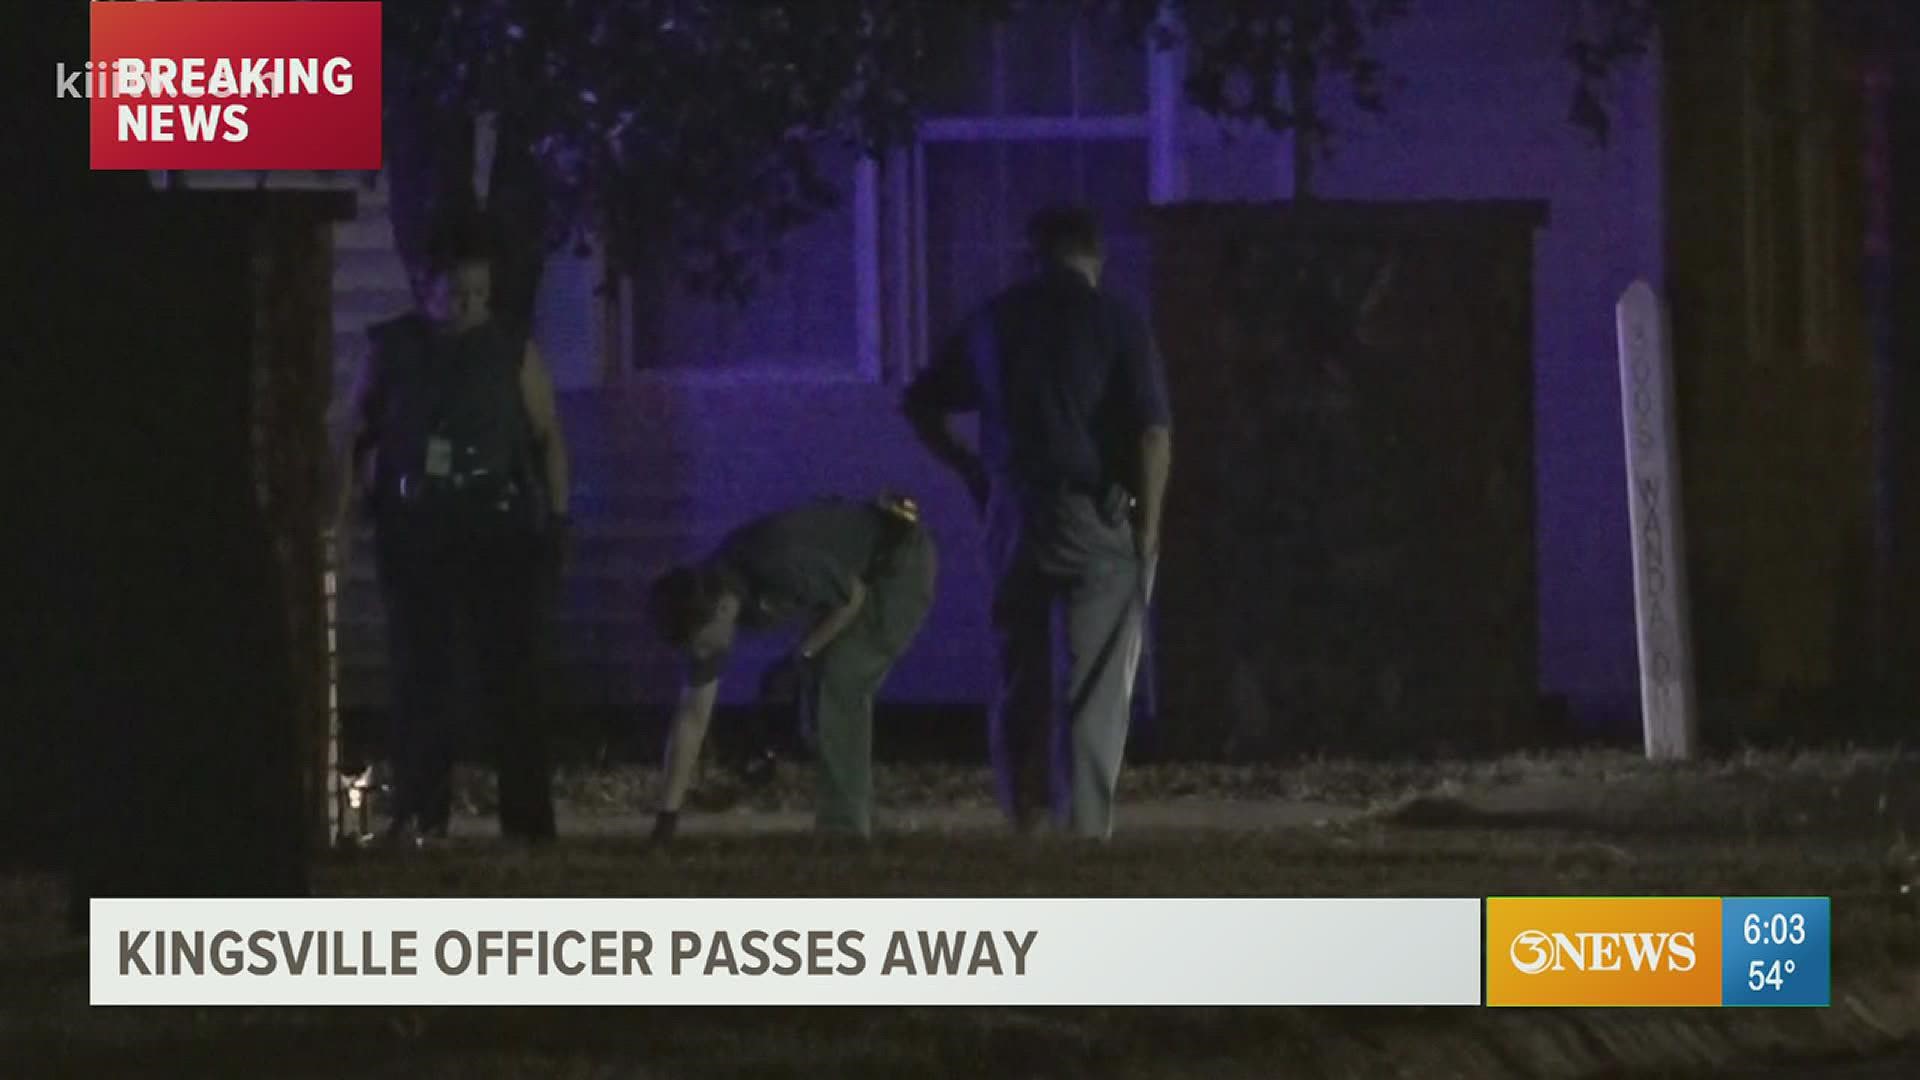 Officer Sherman Benys was shot while responding to a domestic dispute in Kingsville on Monday.